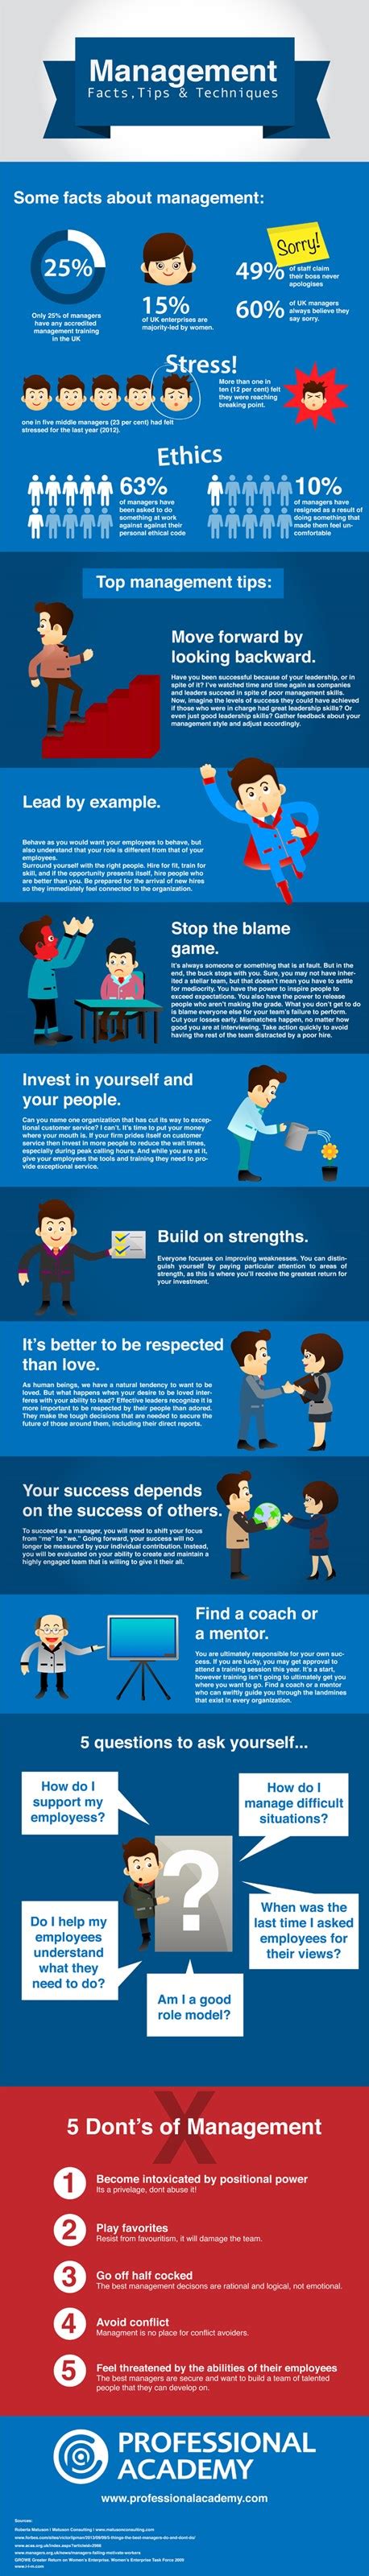 Infographic Blog On Top Management And Leadership Tips